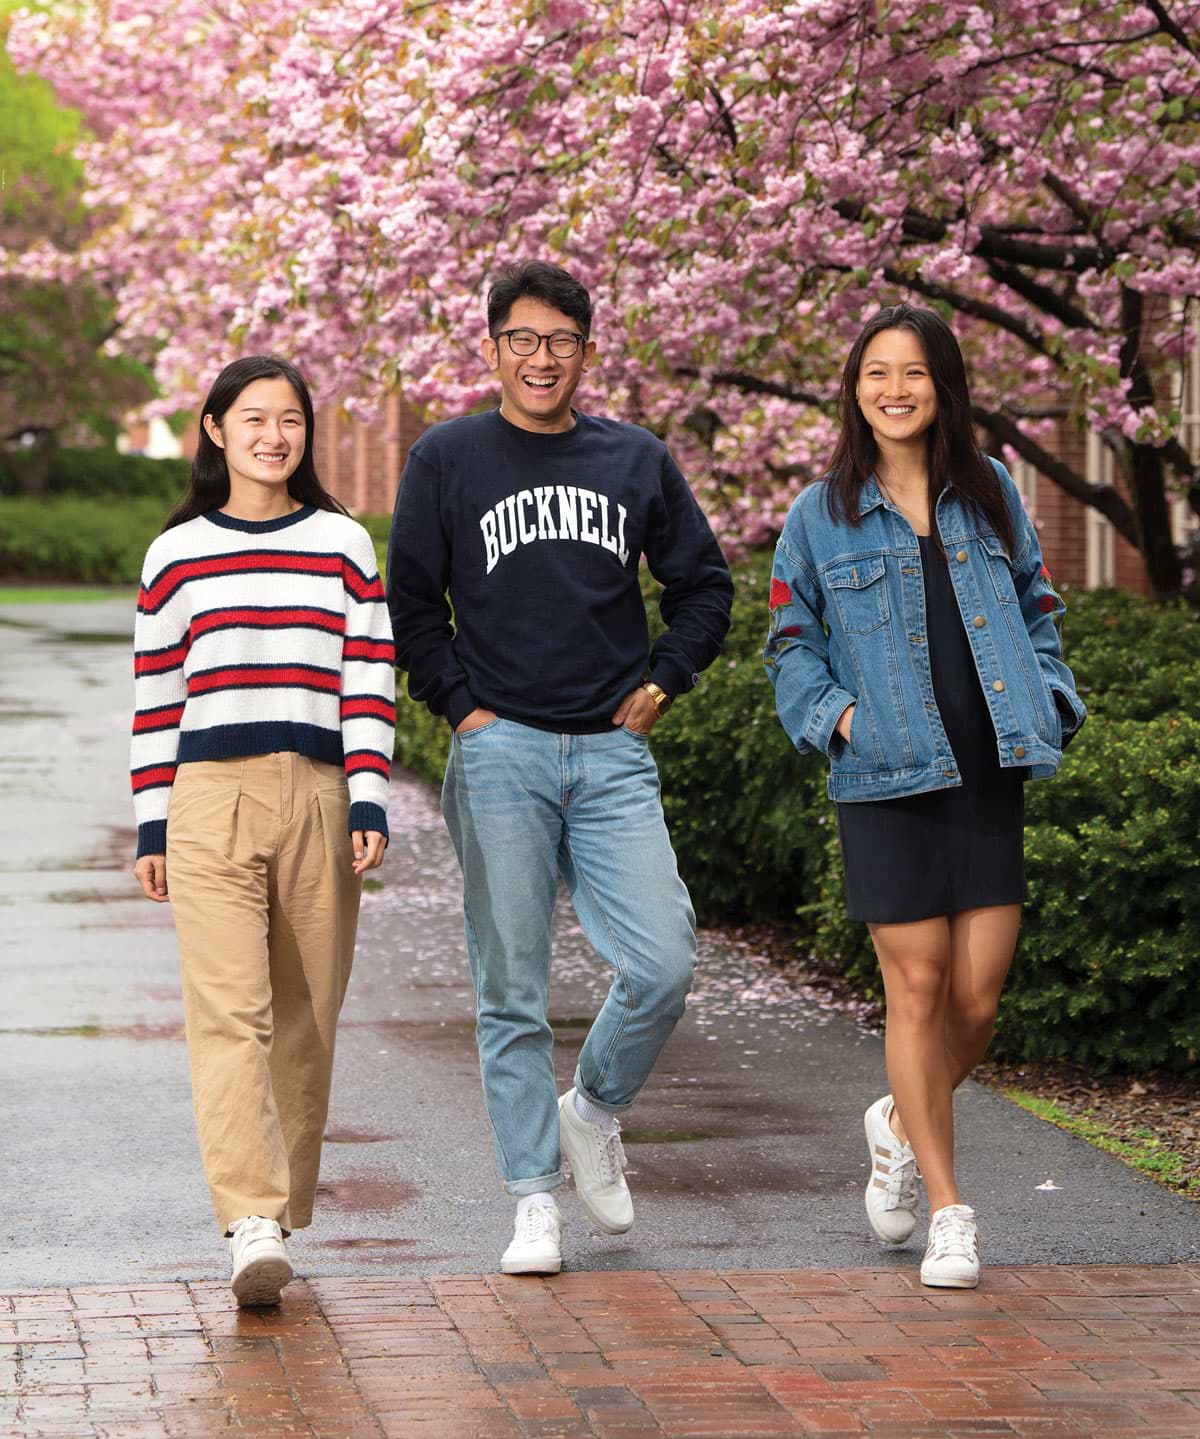 Three of Bucknell’s 135 students from China this spring were, from left, Jiayi “Echo” He ’20, Yuan “Alex” Gao ’19 and Milenna Huang ’22